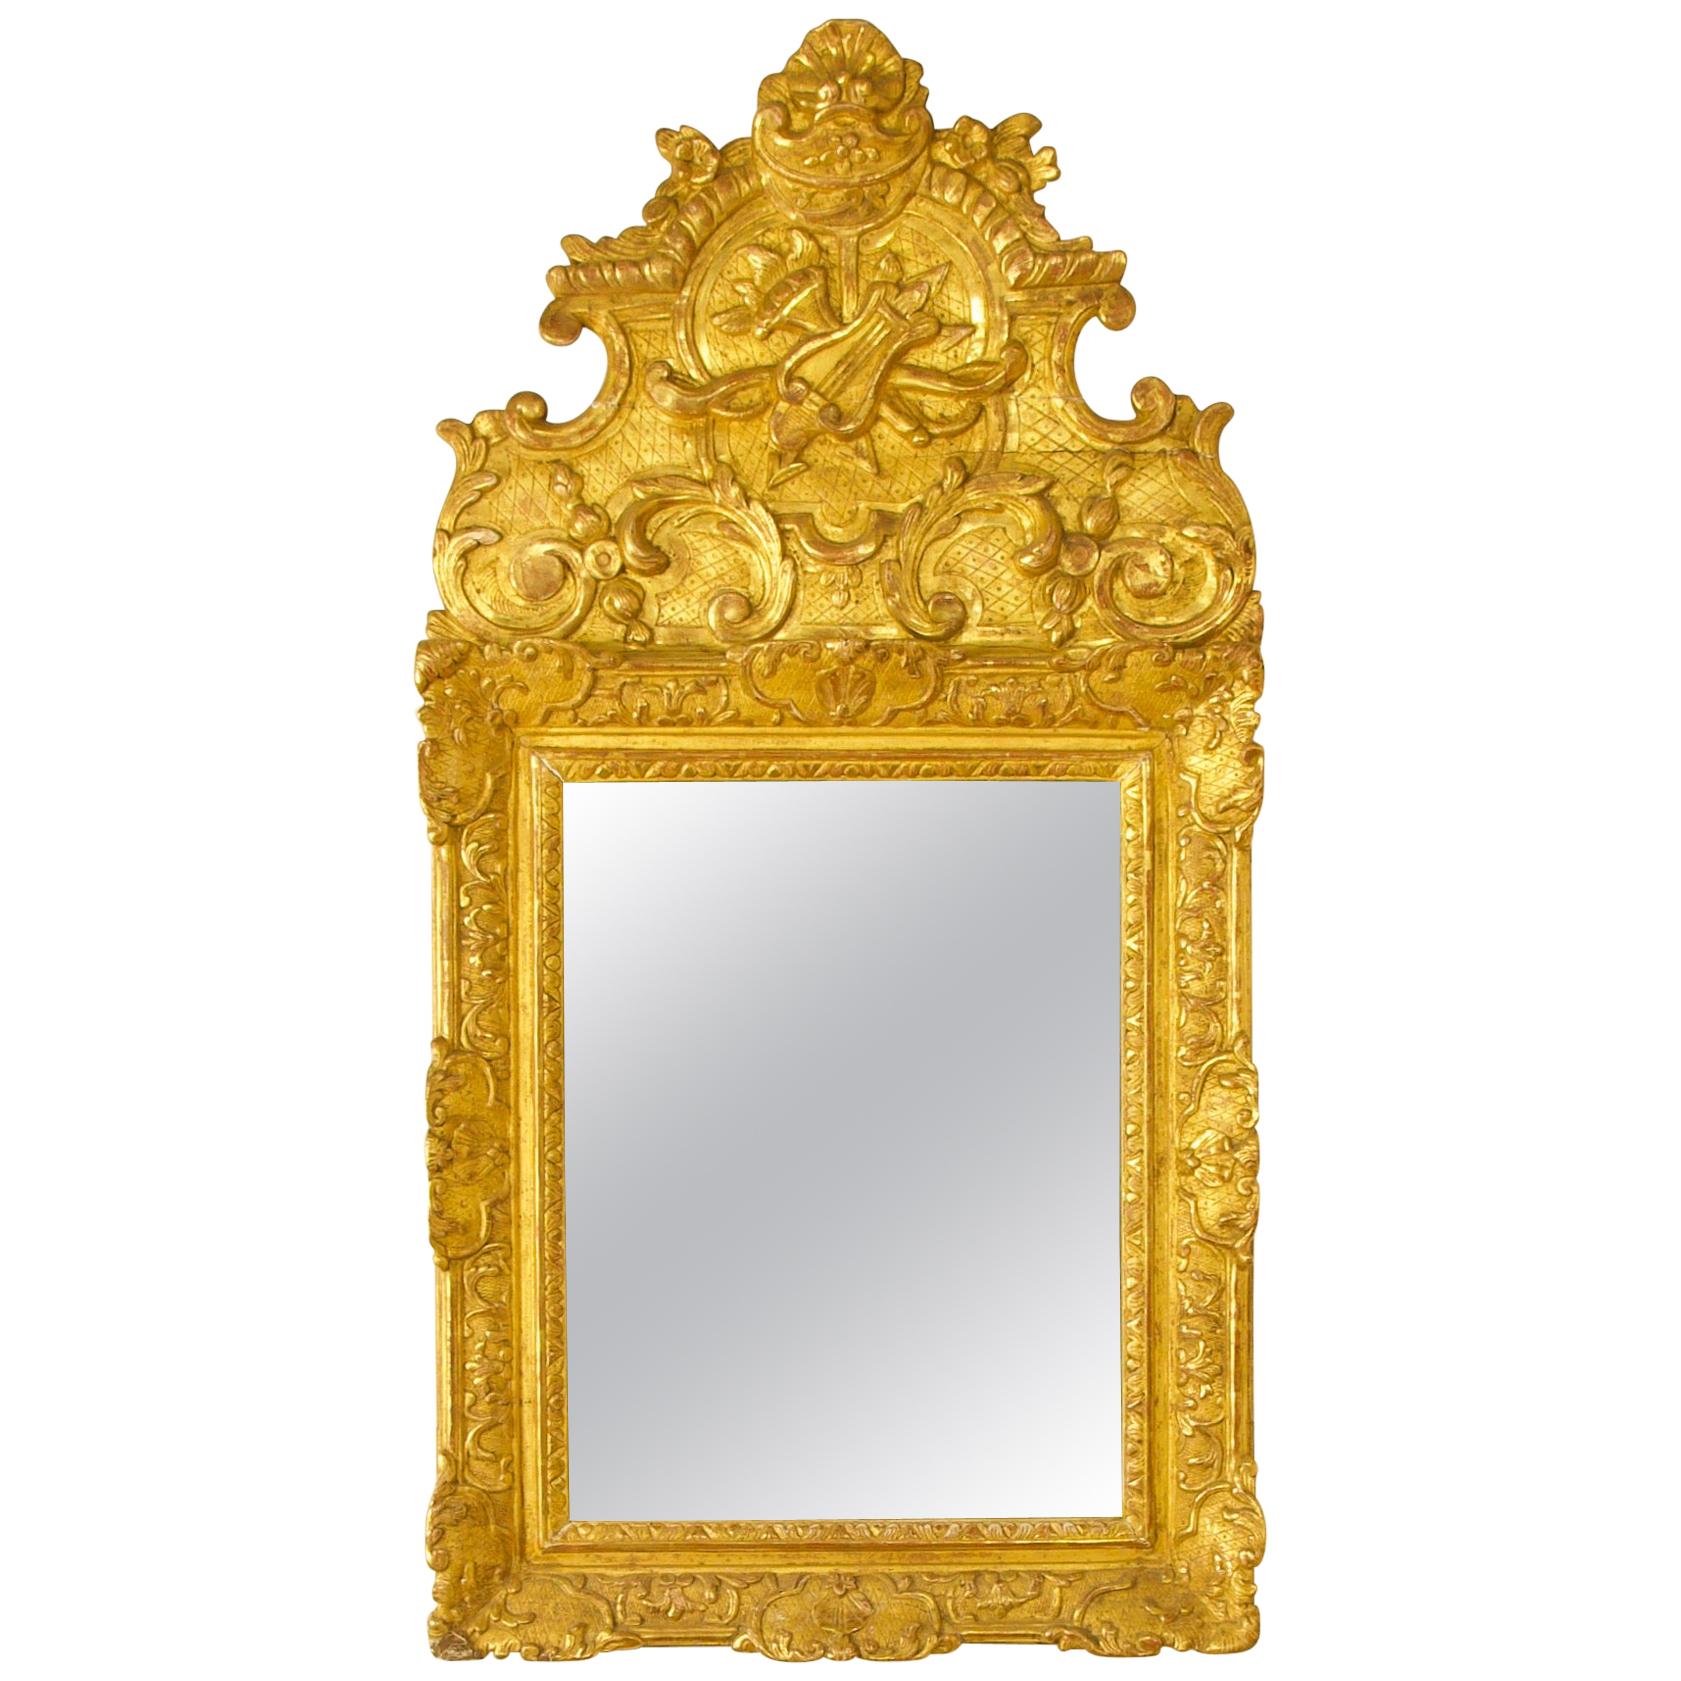 Early 18th Century French Regence Love Symbol Giltwood Mirror